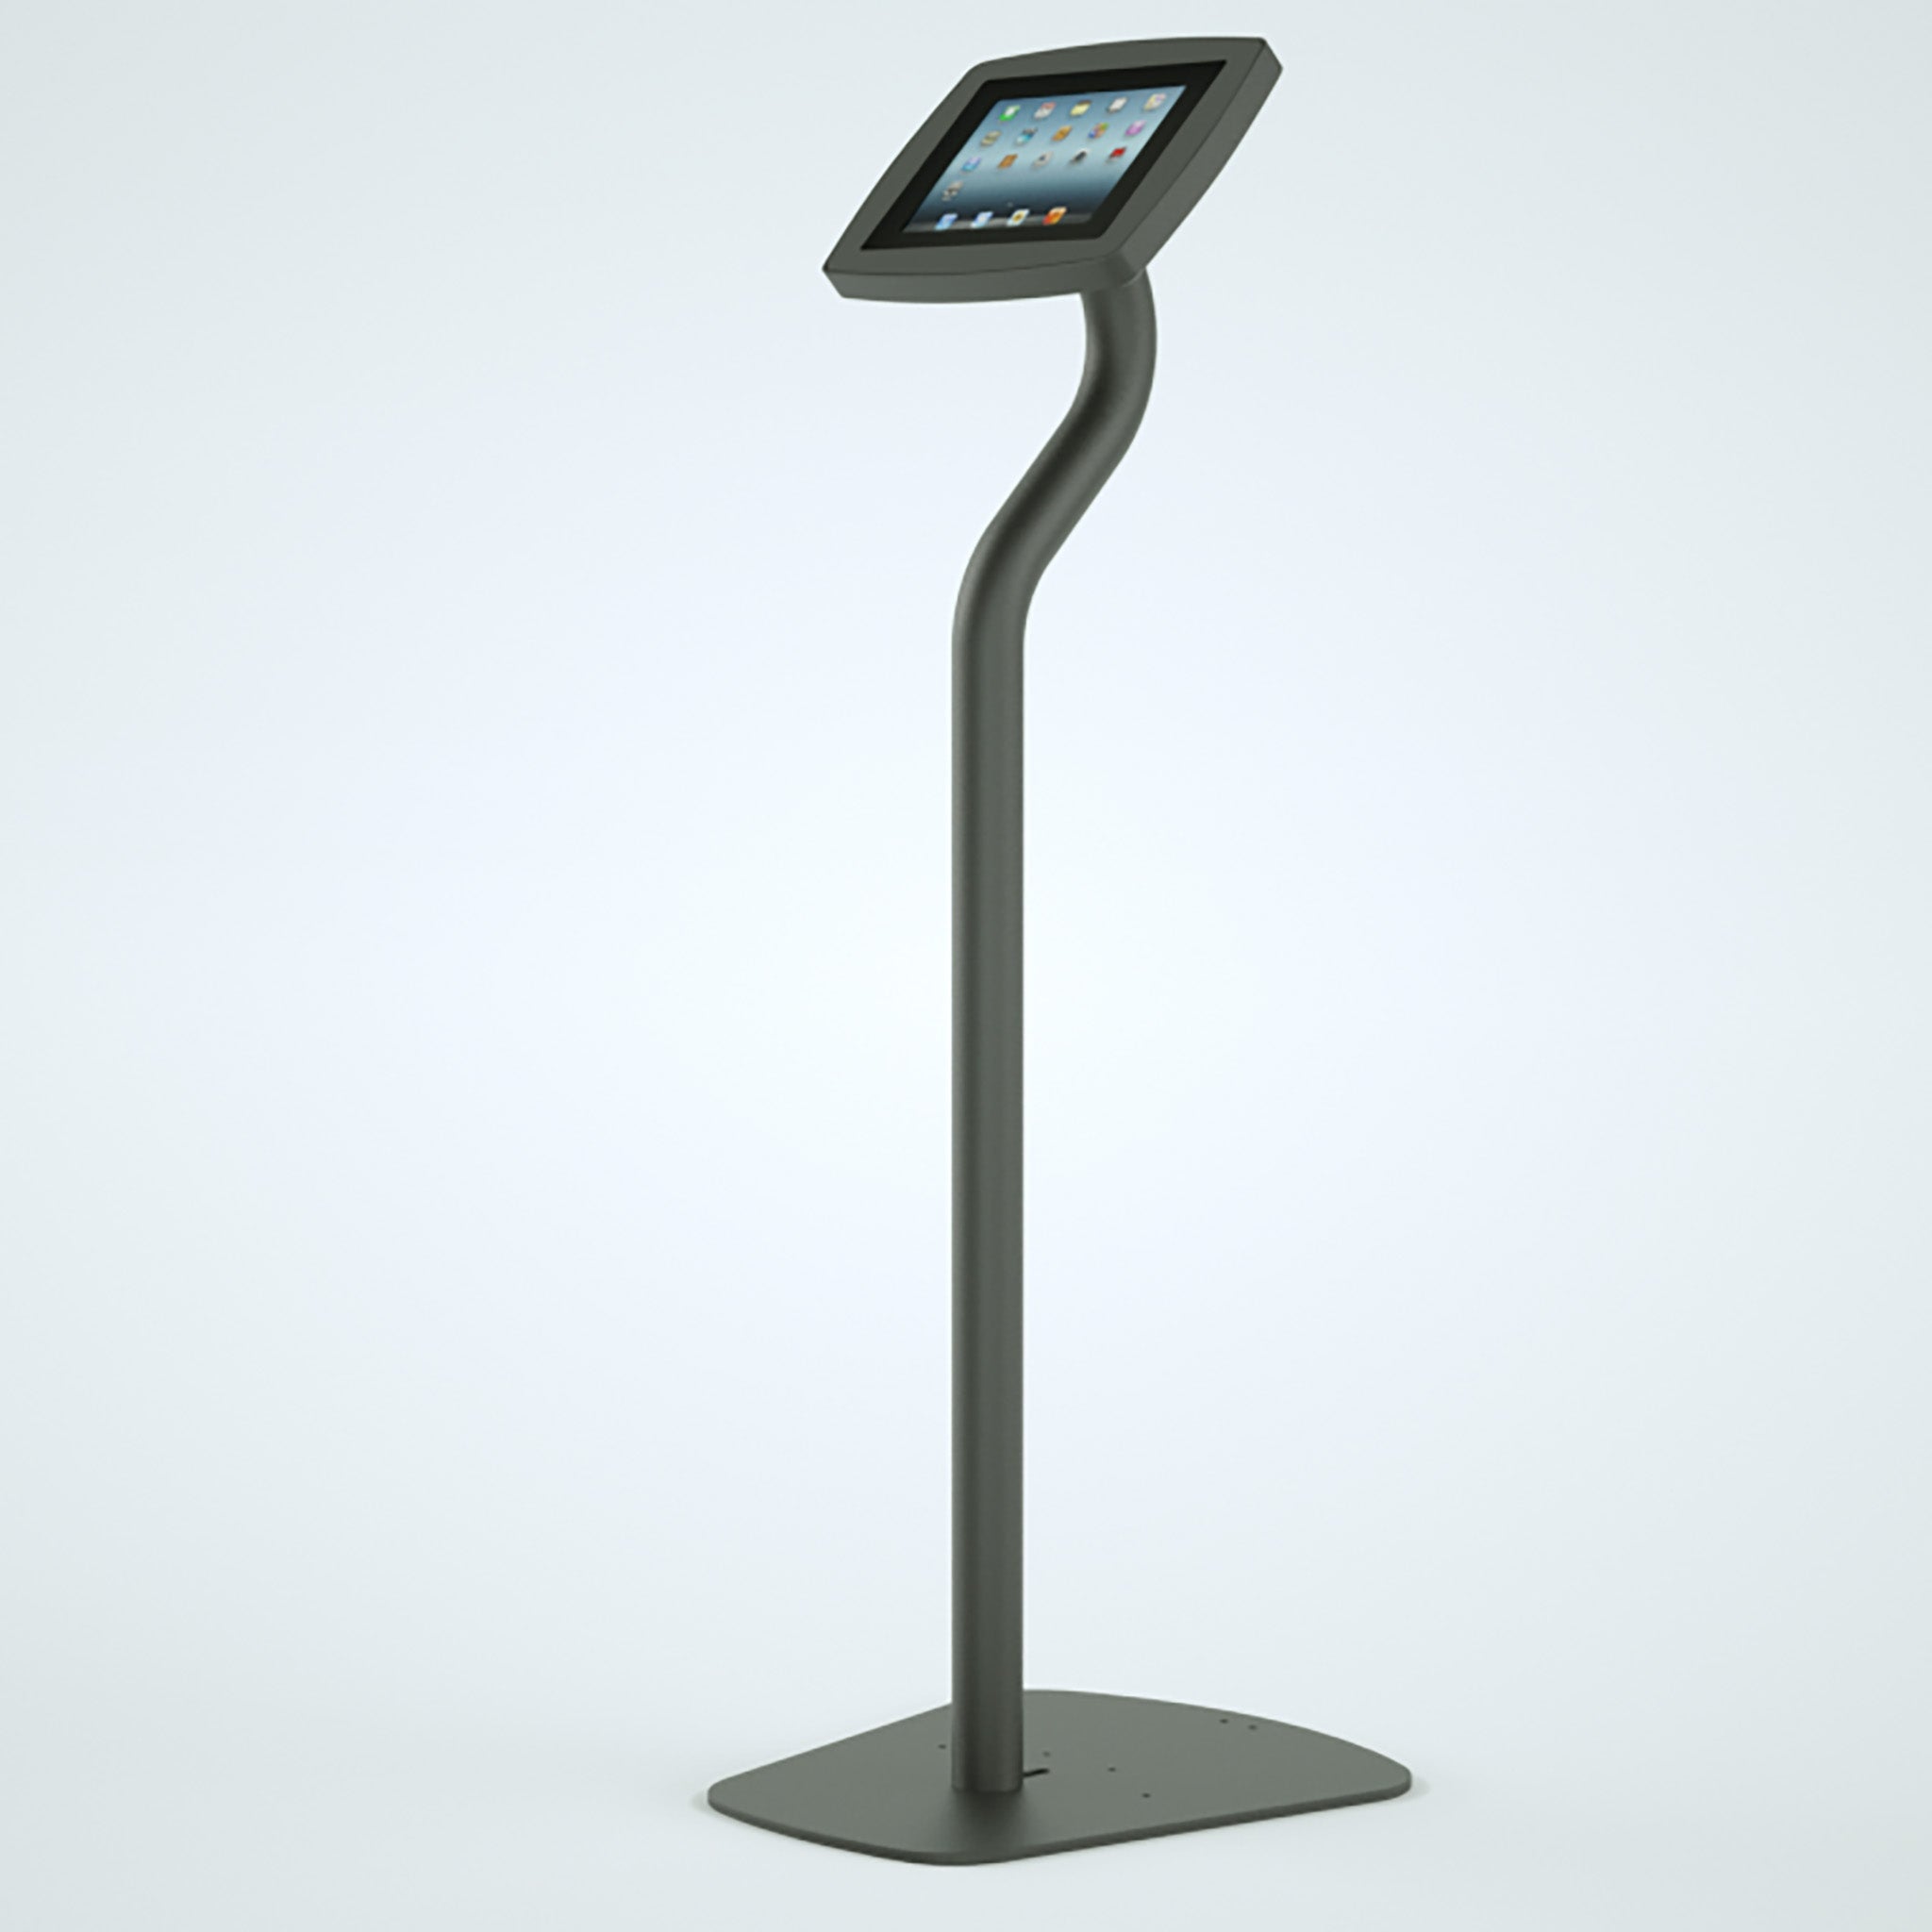 The Floor freestanding iPad and Tablet kiosk in grey with a screen tablet display.